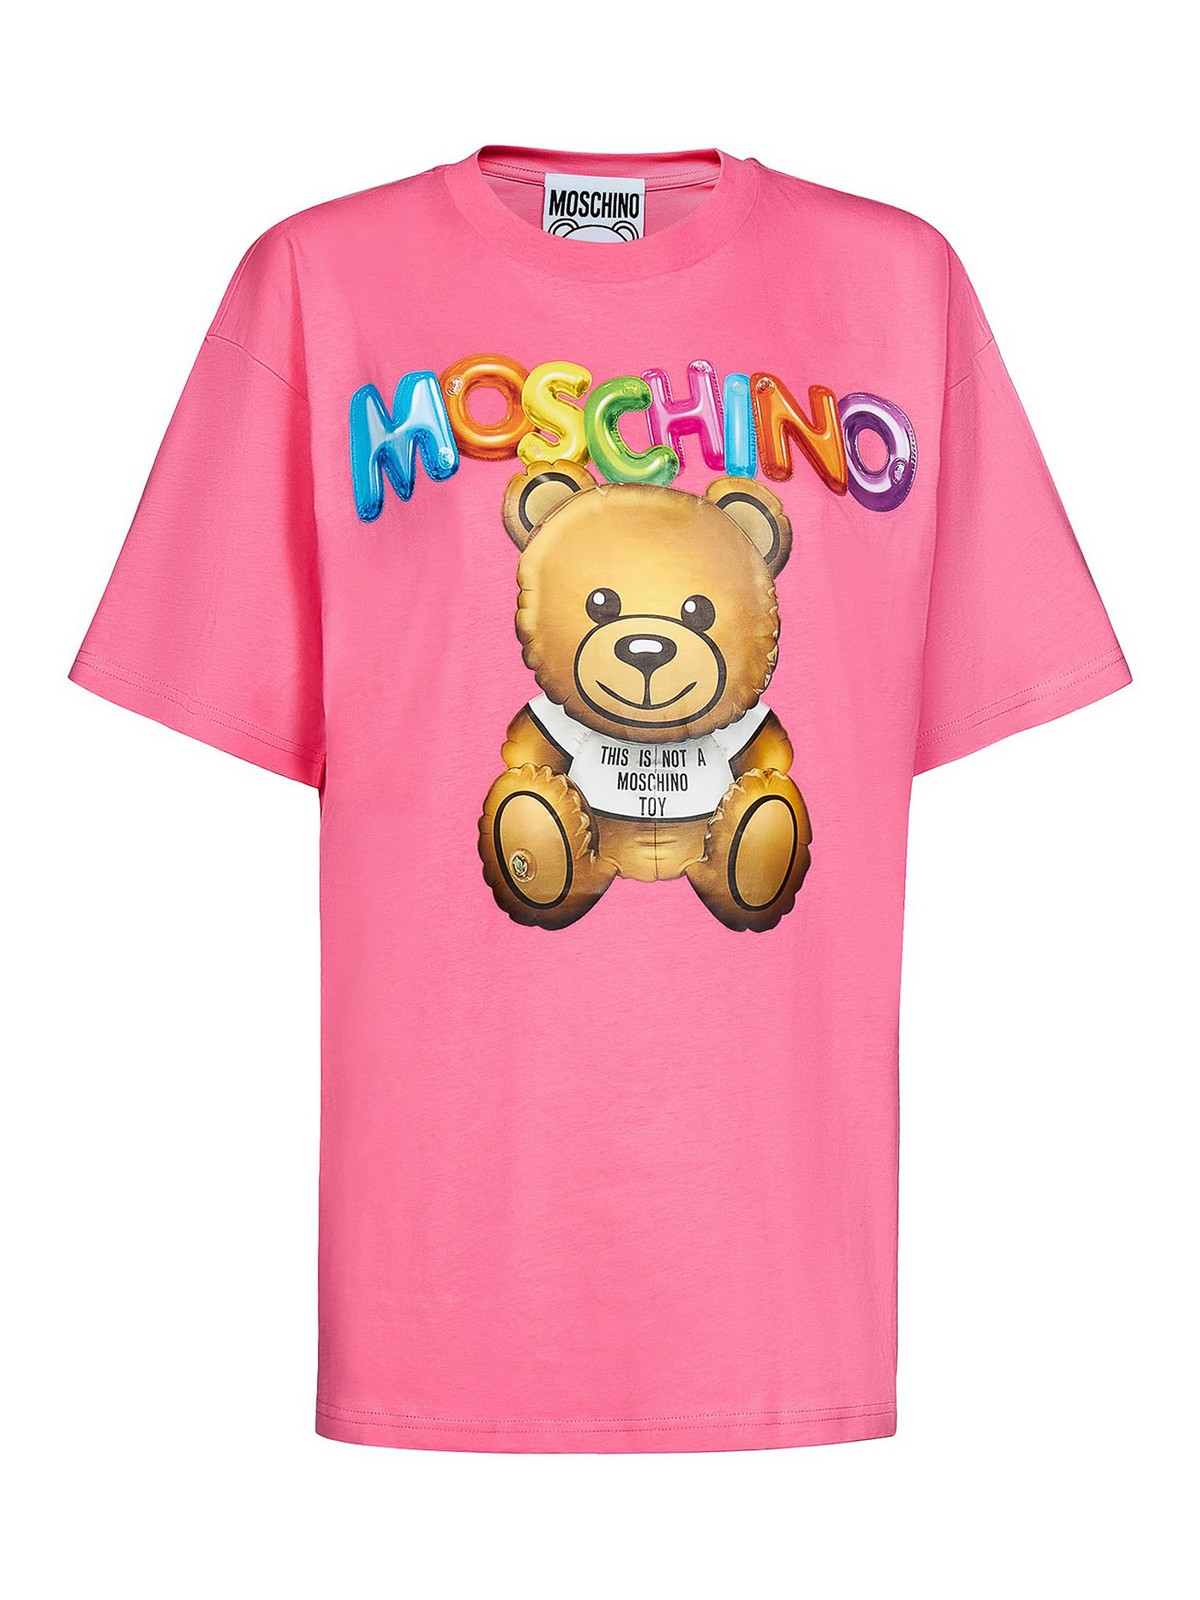 Tシャツ Moschino - Tシャツ - ピンク - 070104411208 | THEBS